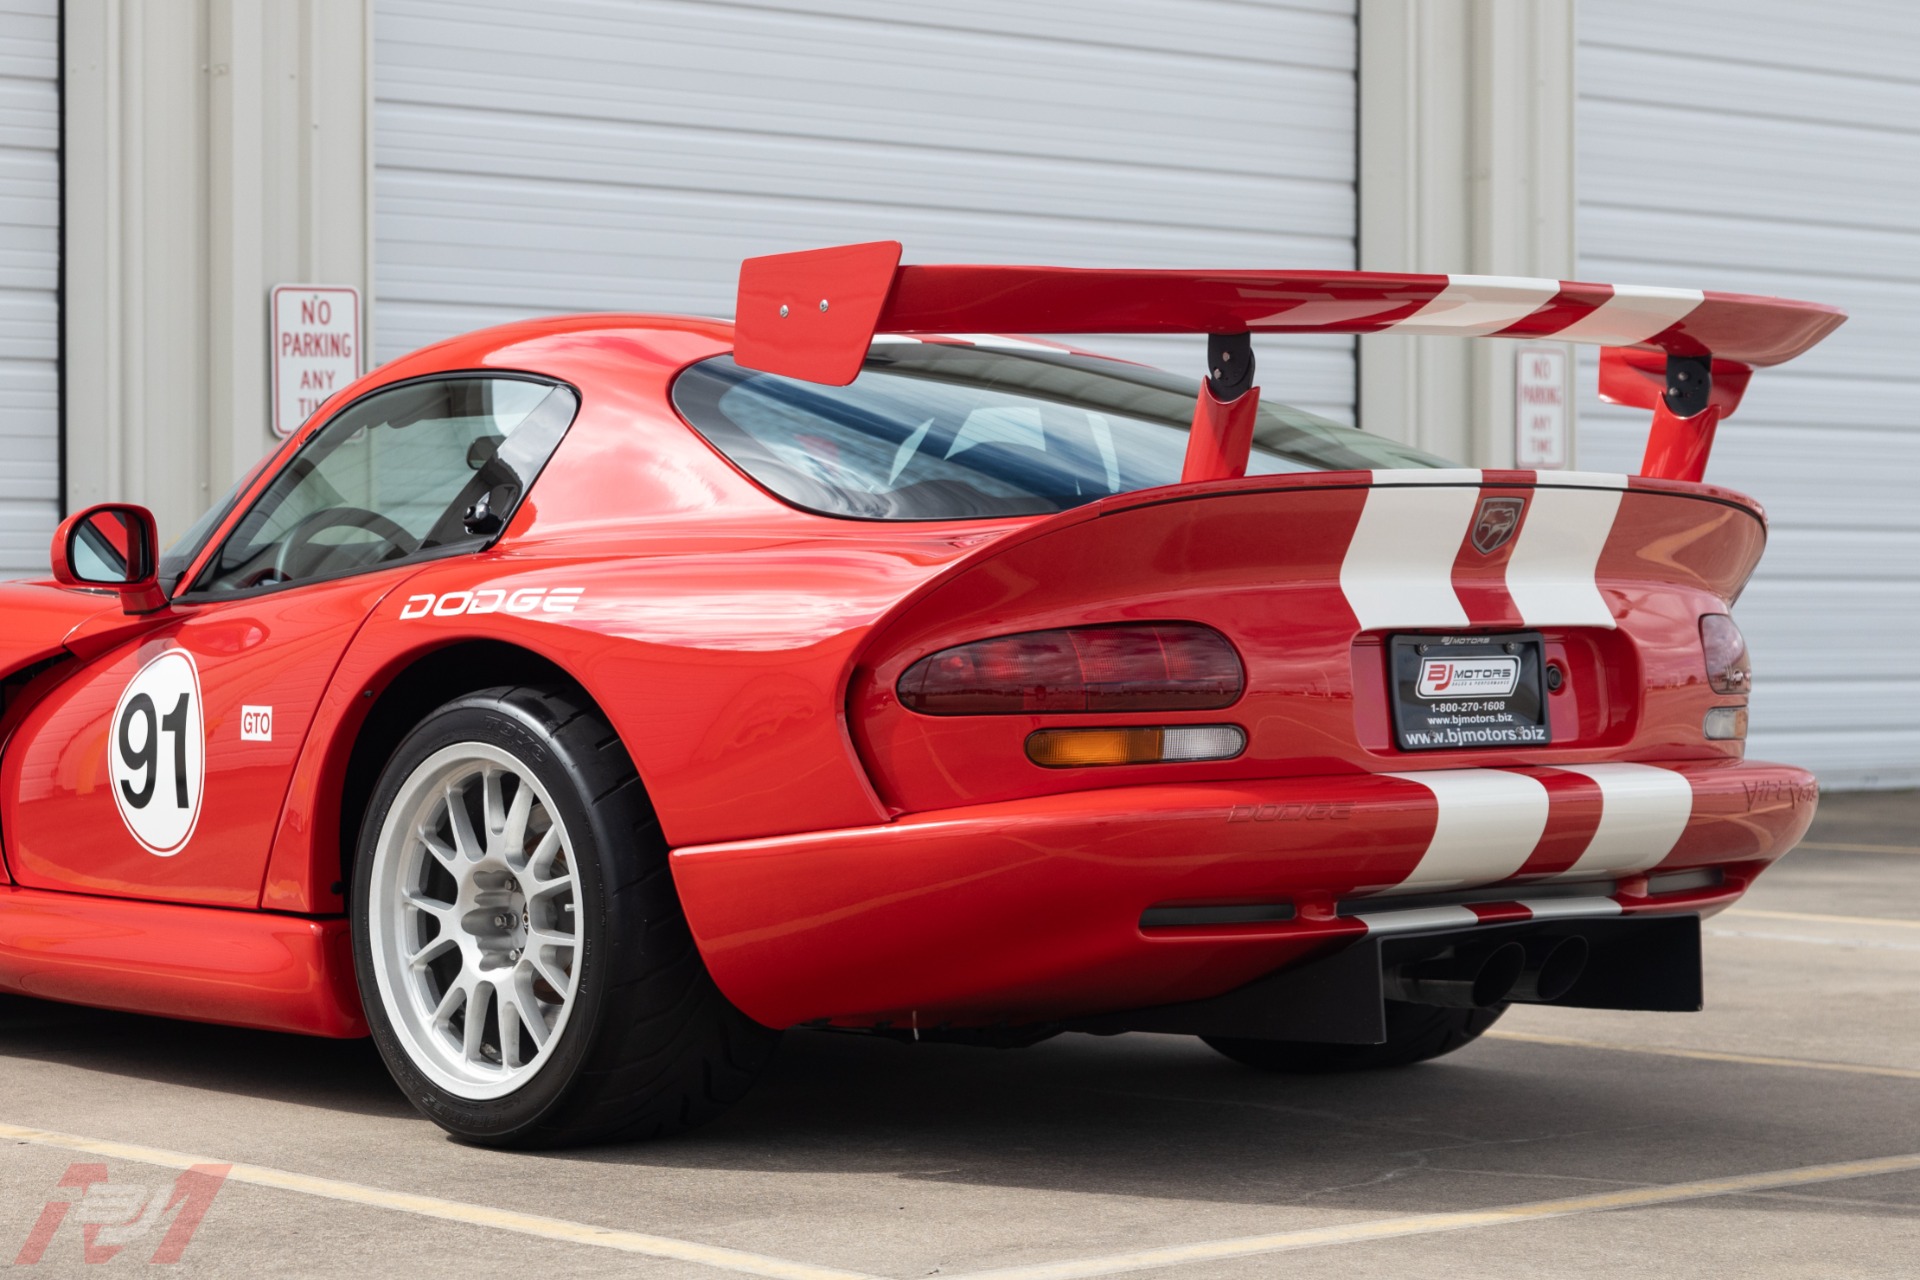 Used 2002 Dodge Viper GTS Final Edition Autoform Daytona For Sale (Special  Pricing)